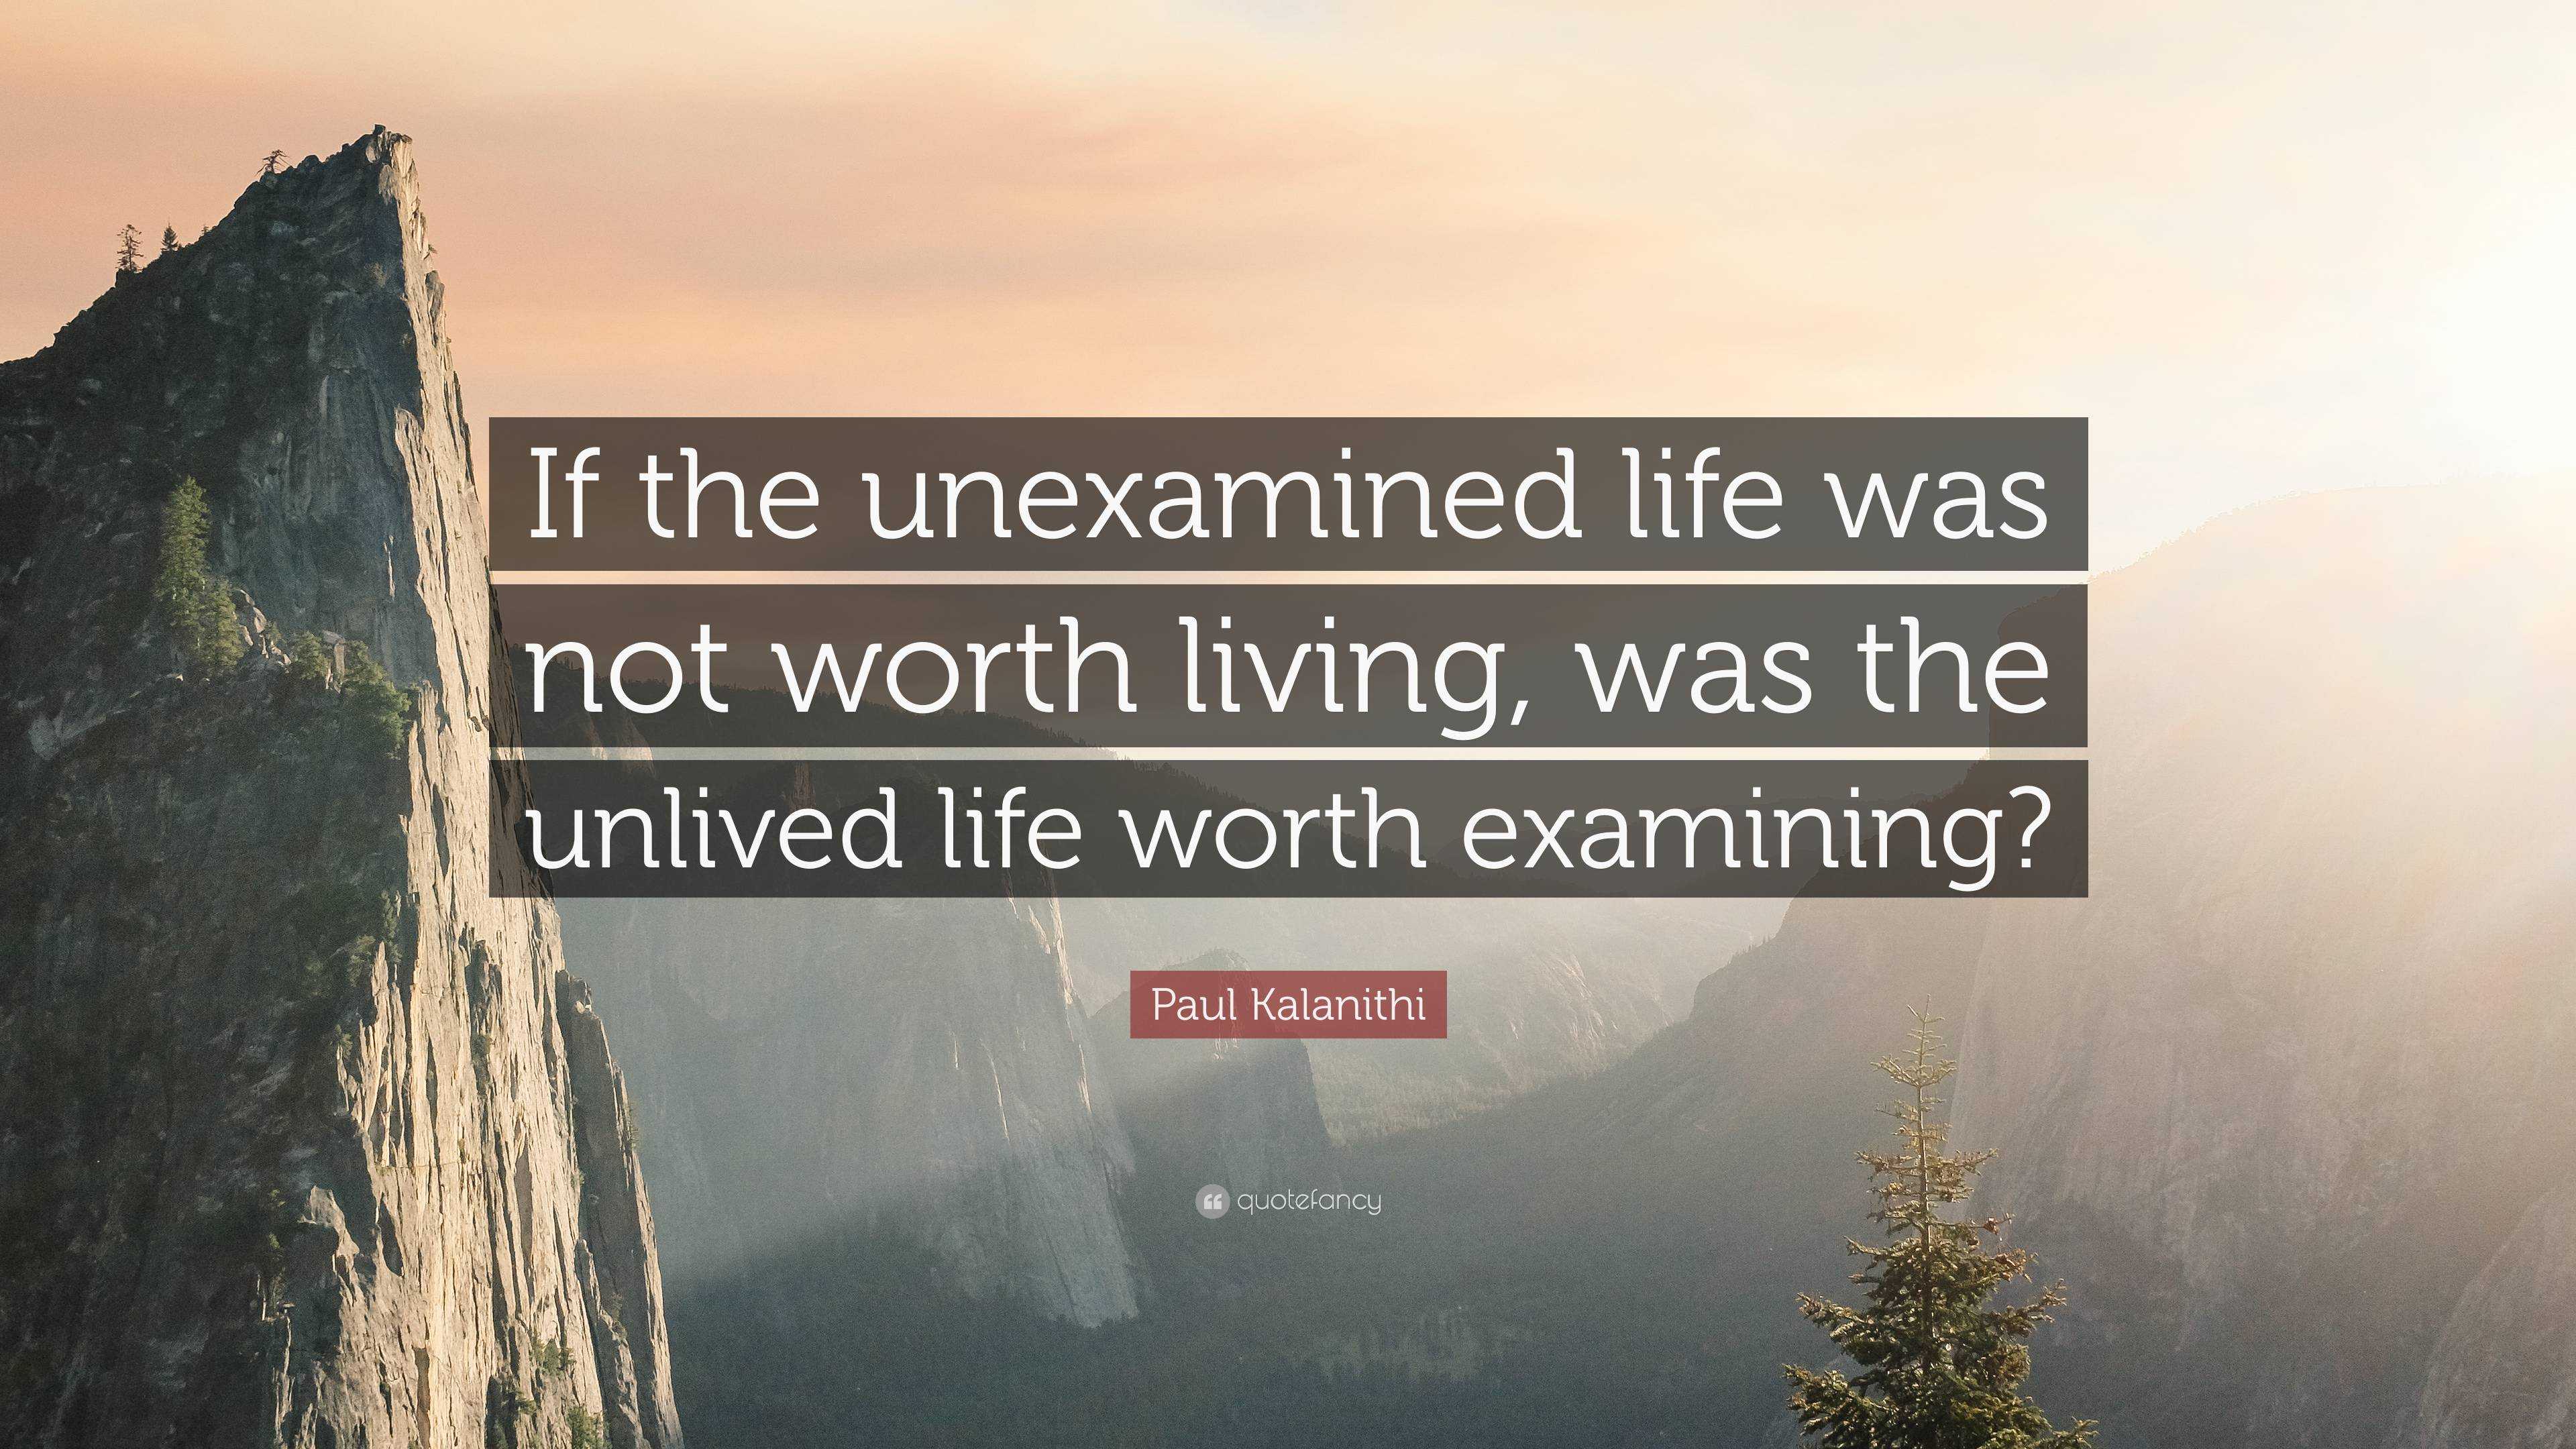 Paul Kalanithi Quote: “If the unexamined life was not worth living, was